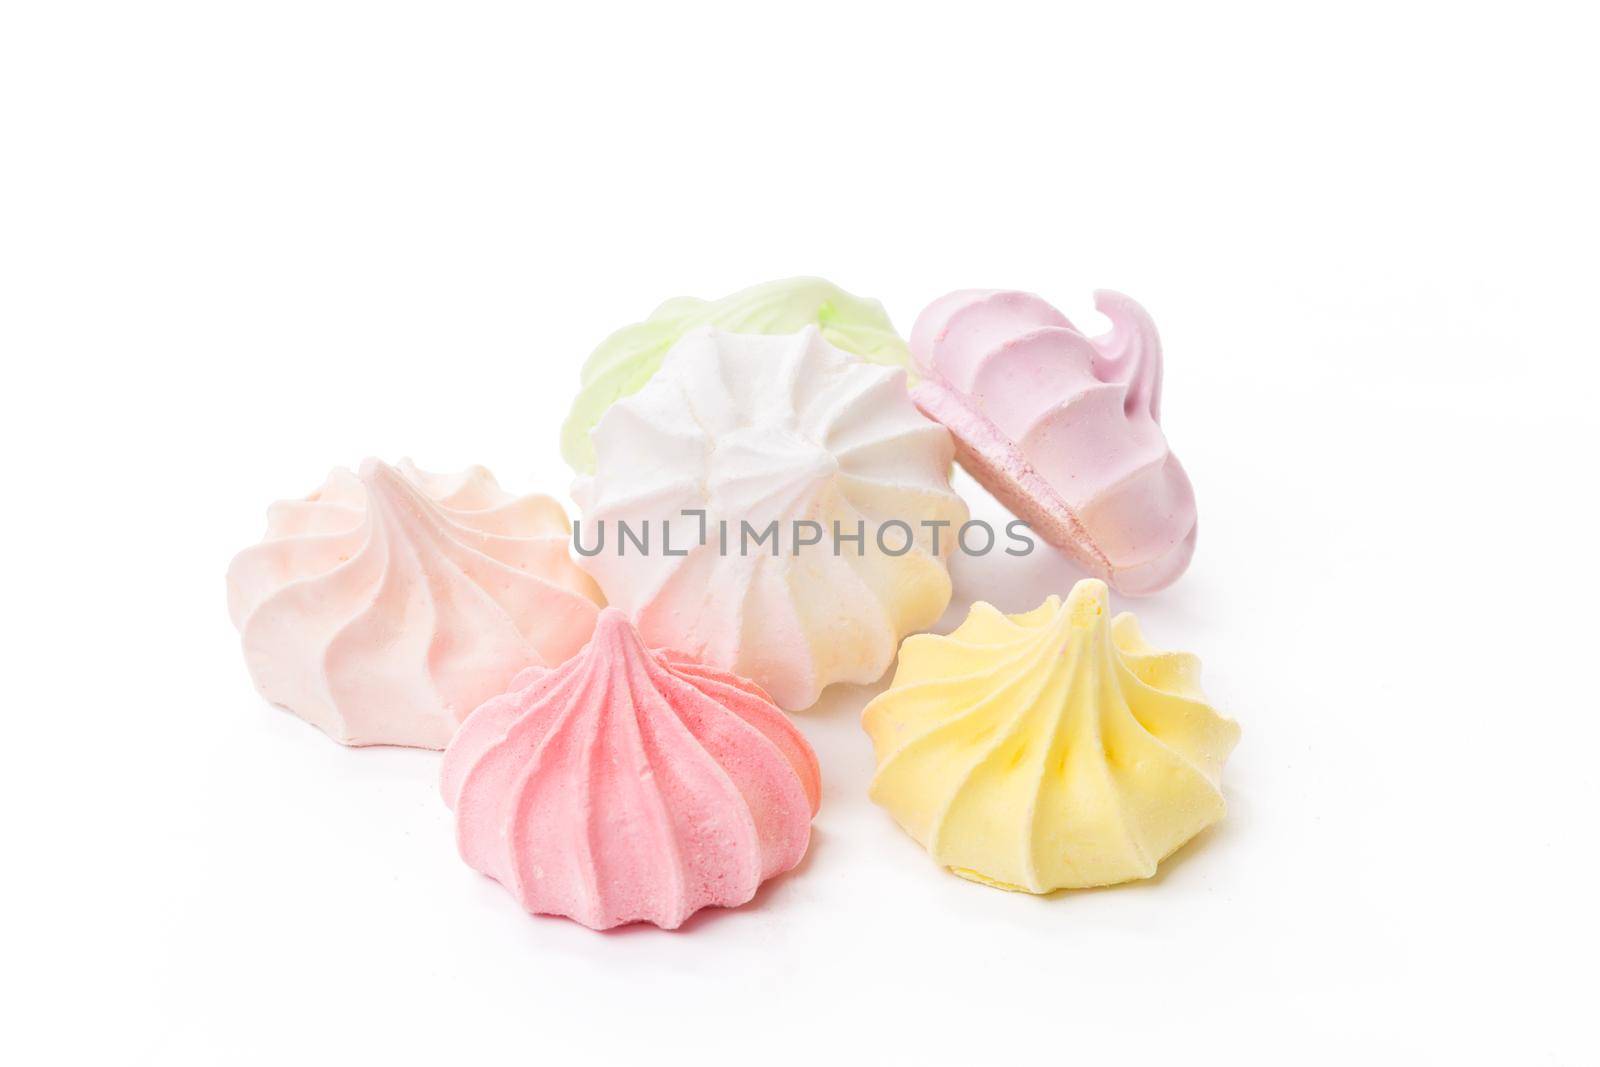 Pile of colorful meringue cookies isolated on white by Fabrikasimf